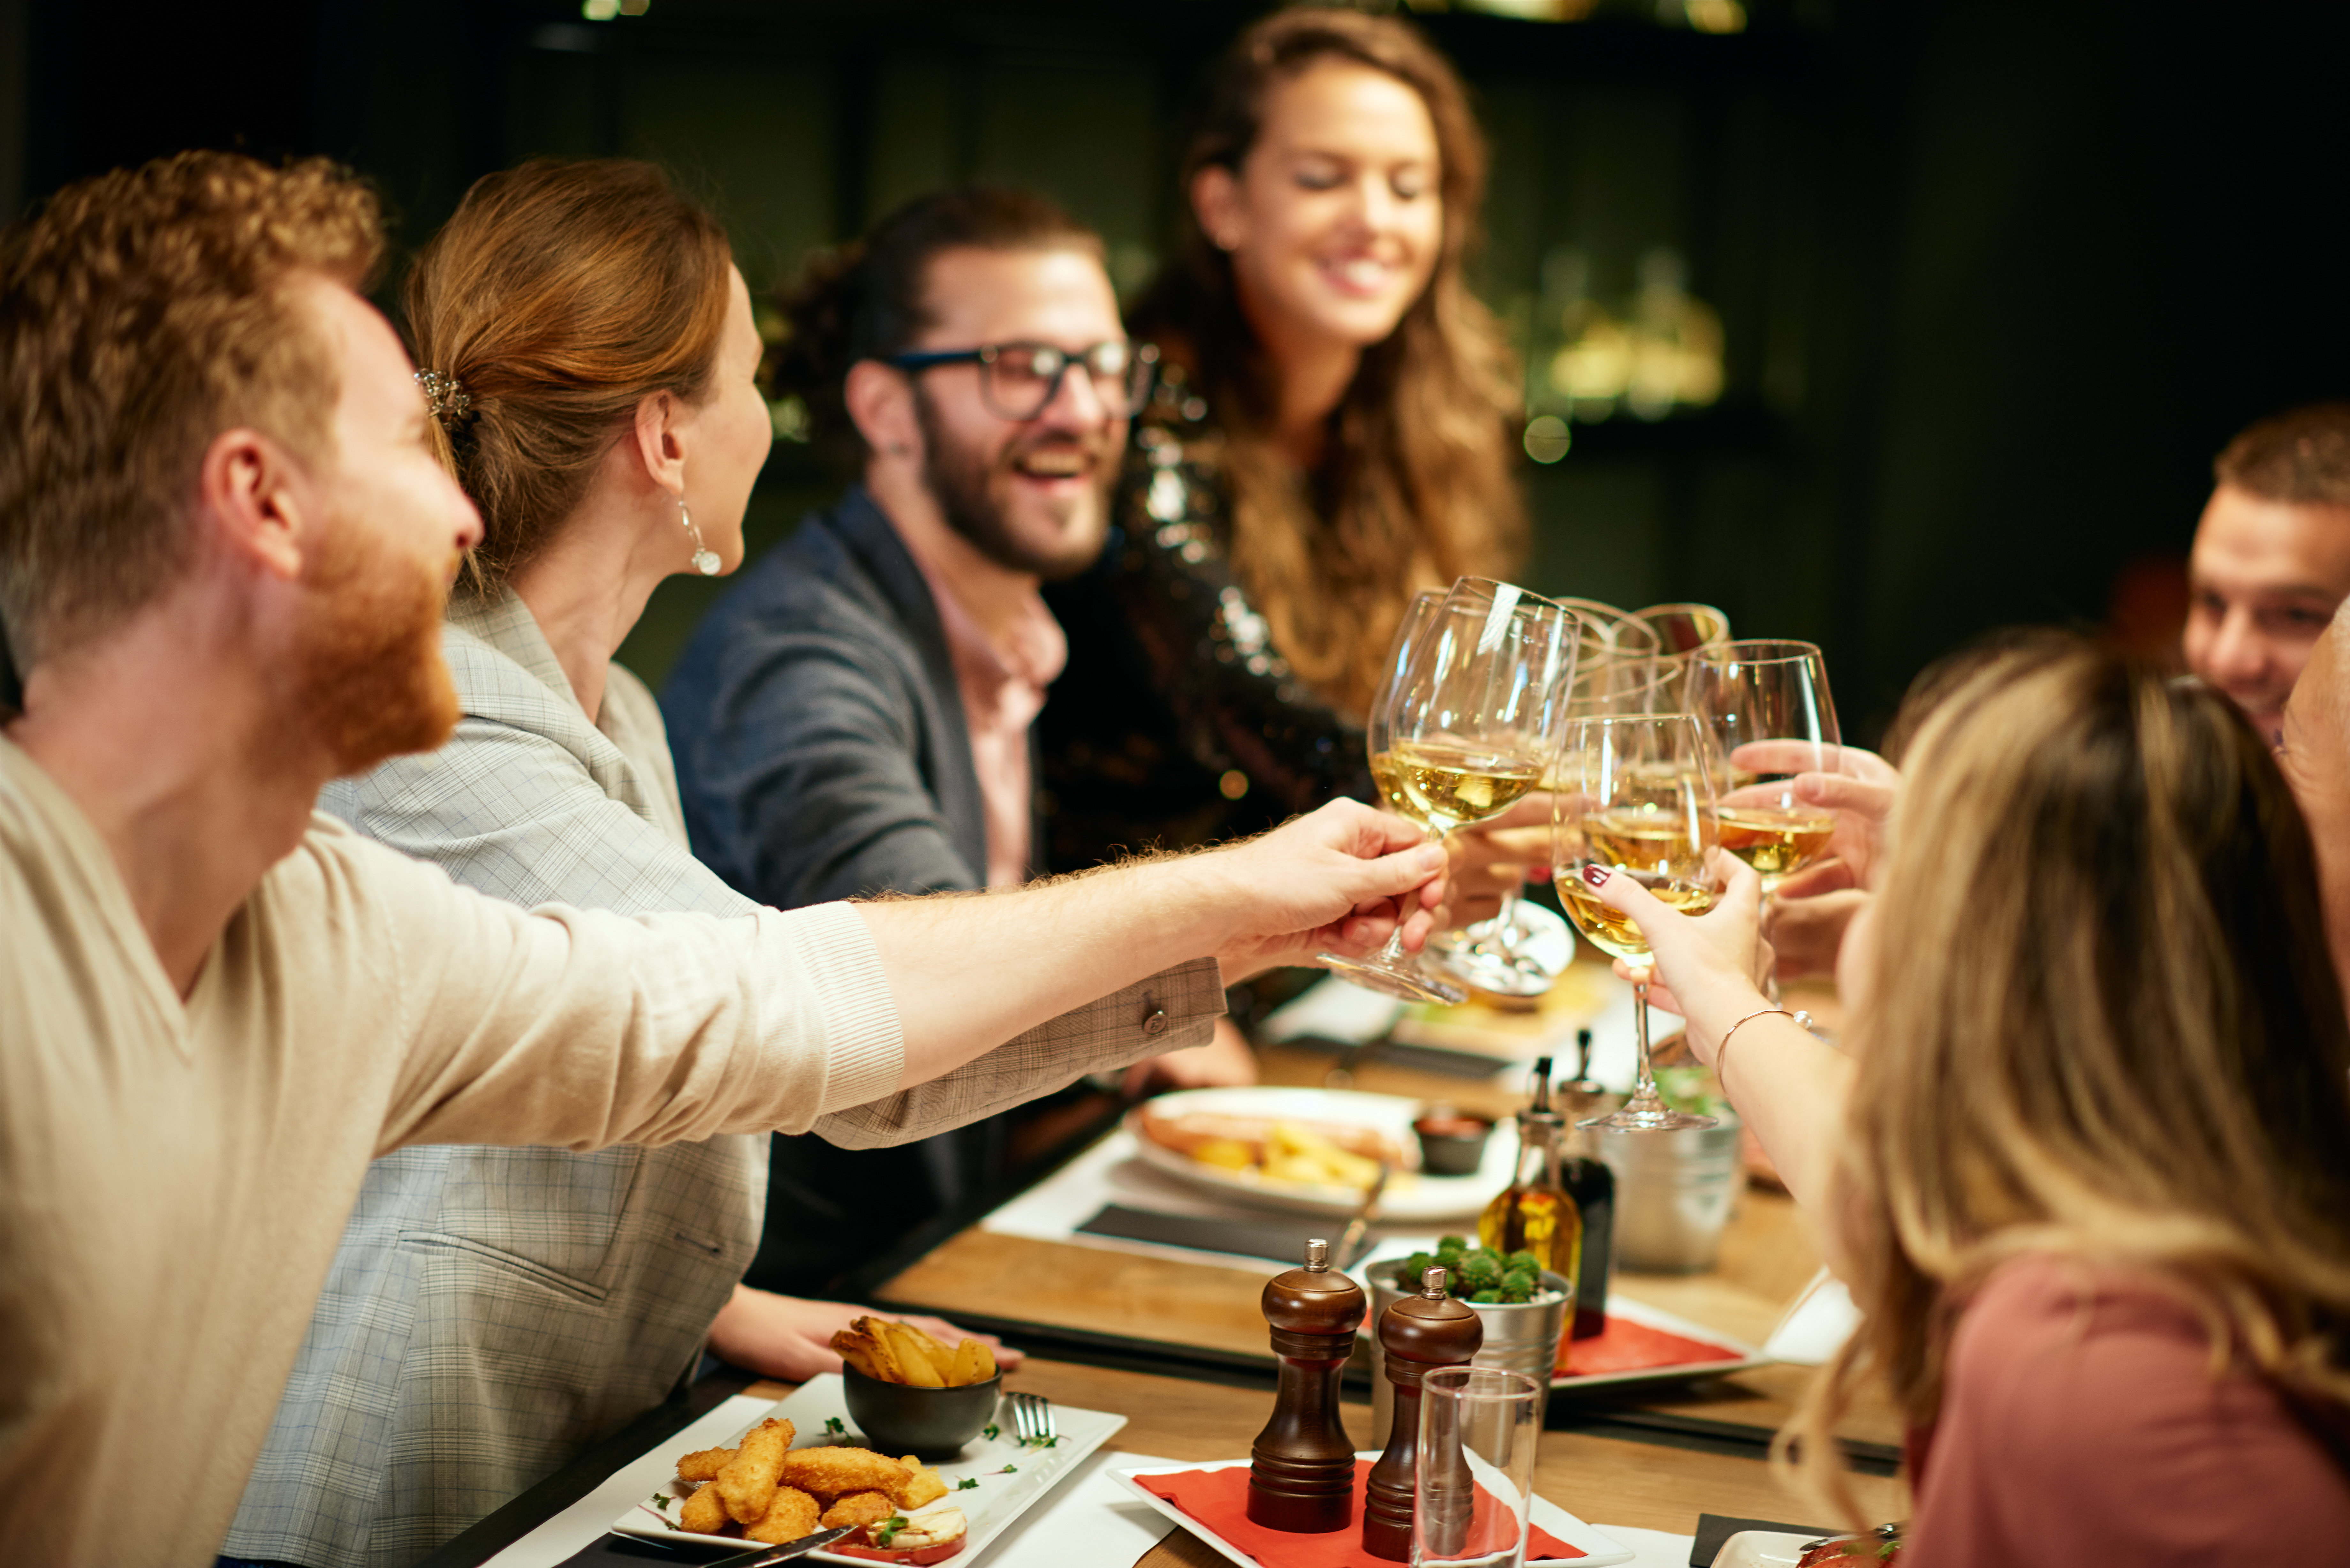 A group of friends sitting in a restaurant for dinner and raising their glasses | Source: Shutterstock